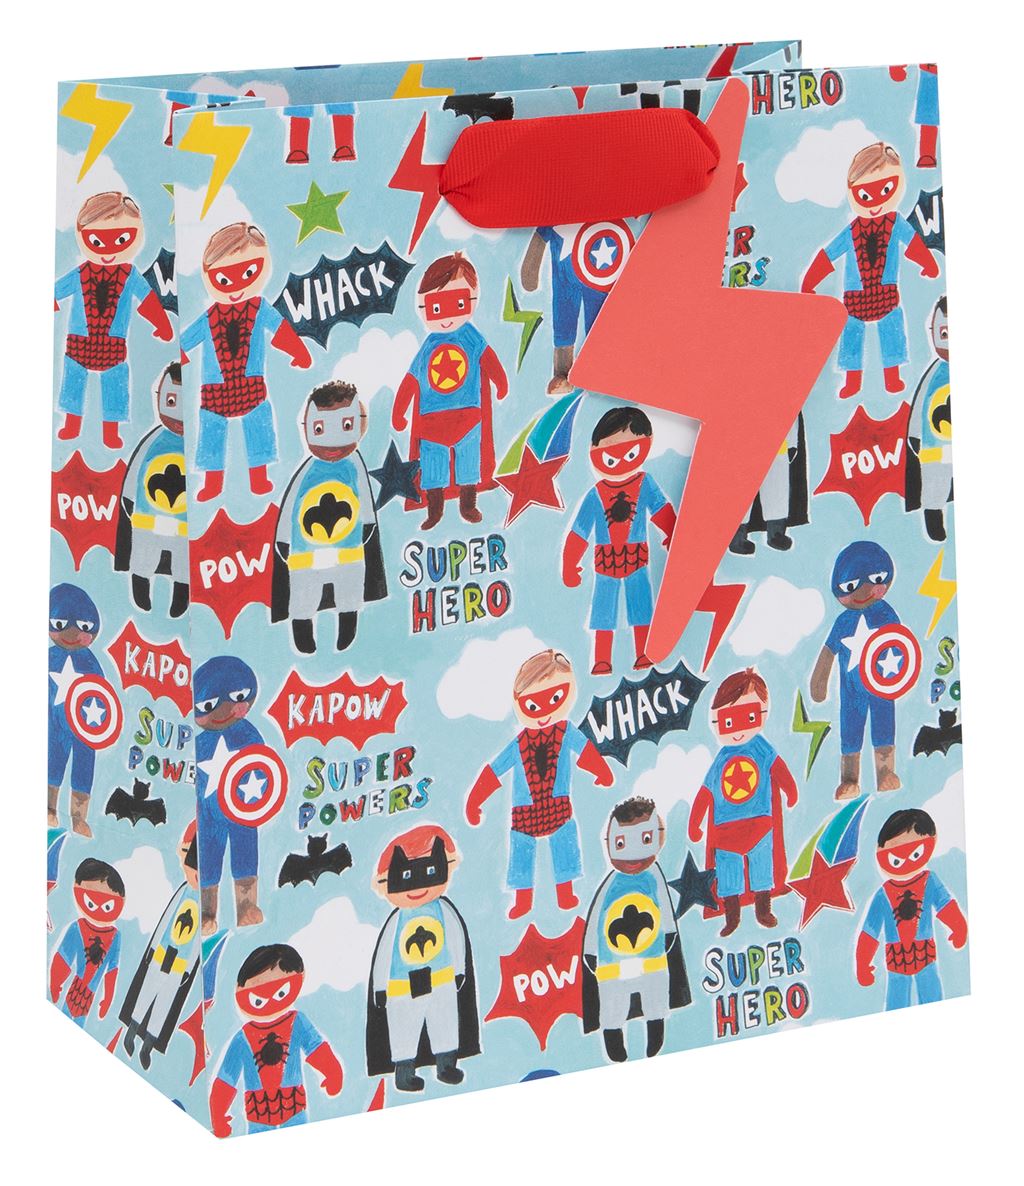 A gift bag with a light blue background covered in superhero illustrations. Little boys are dressed as Captain America, Batman and Spiderman feature. There are also embellishments in the background of white clouds, red thunderbolts and phrases such as &#39;whack&#39;, &#39;pow&#39; and &#39;kapow&#39;. There is also a red ribbon handle with a red thunderbolt gift tag.